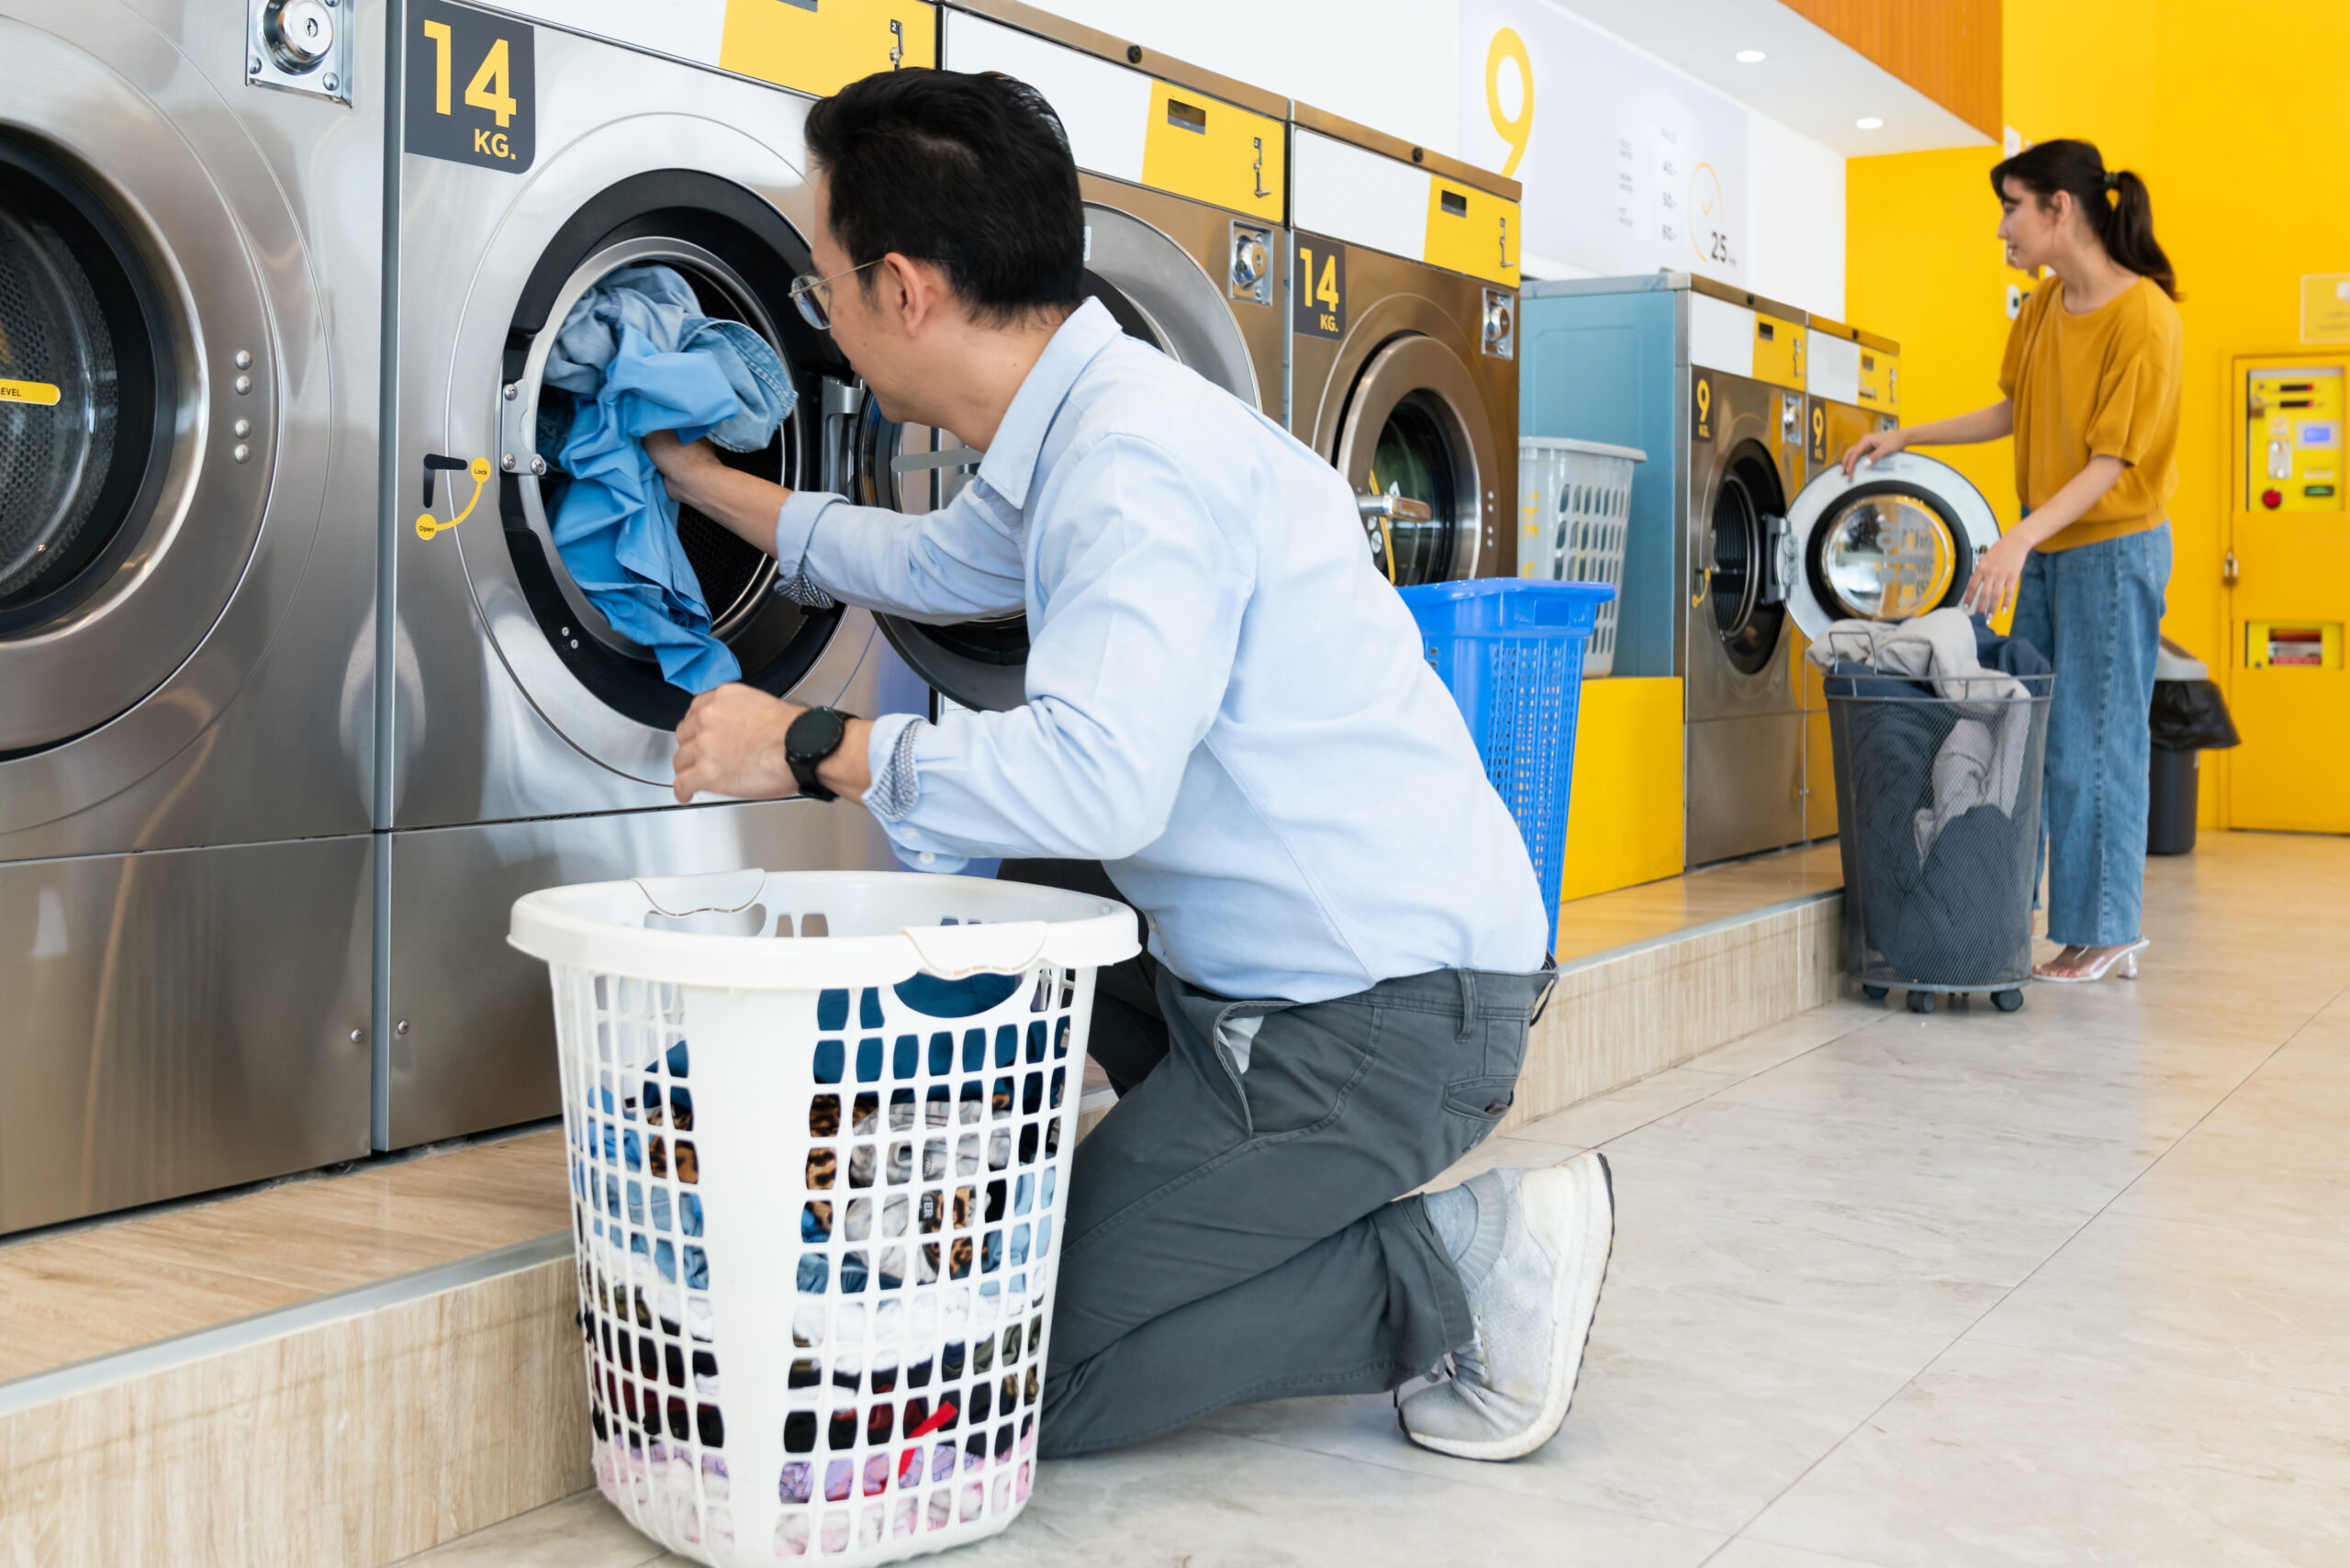 People using the self-service laundromats